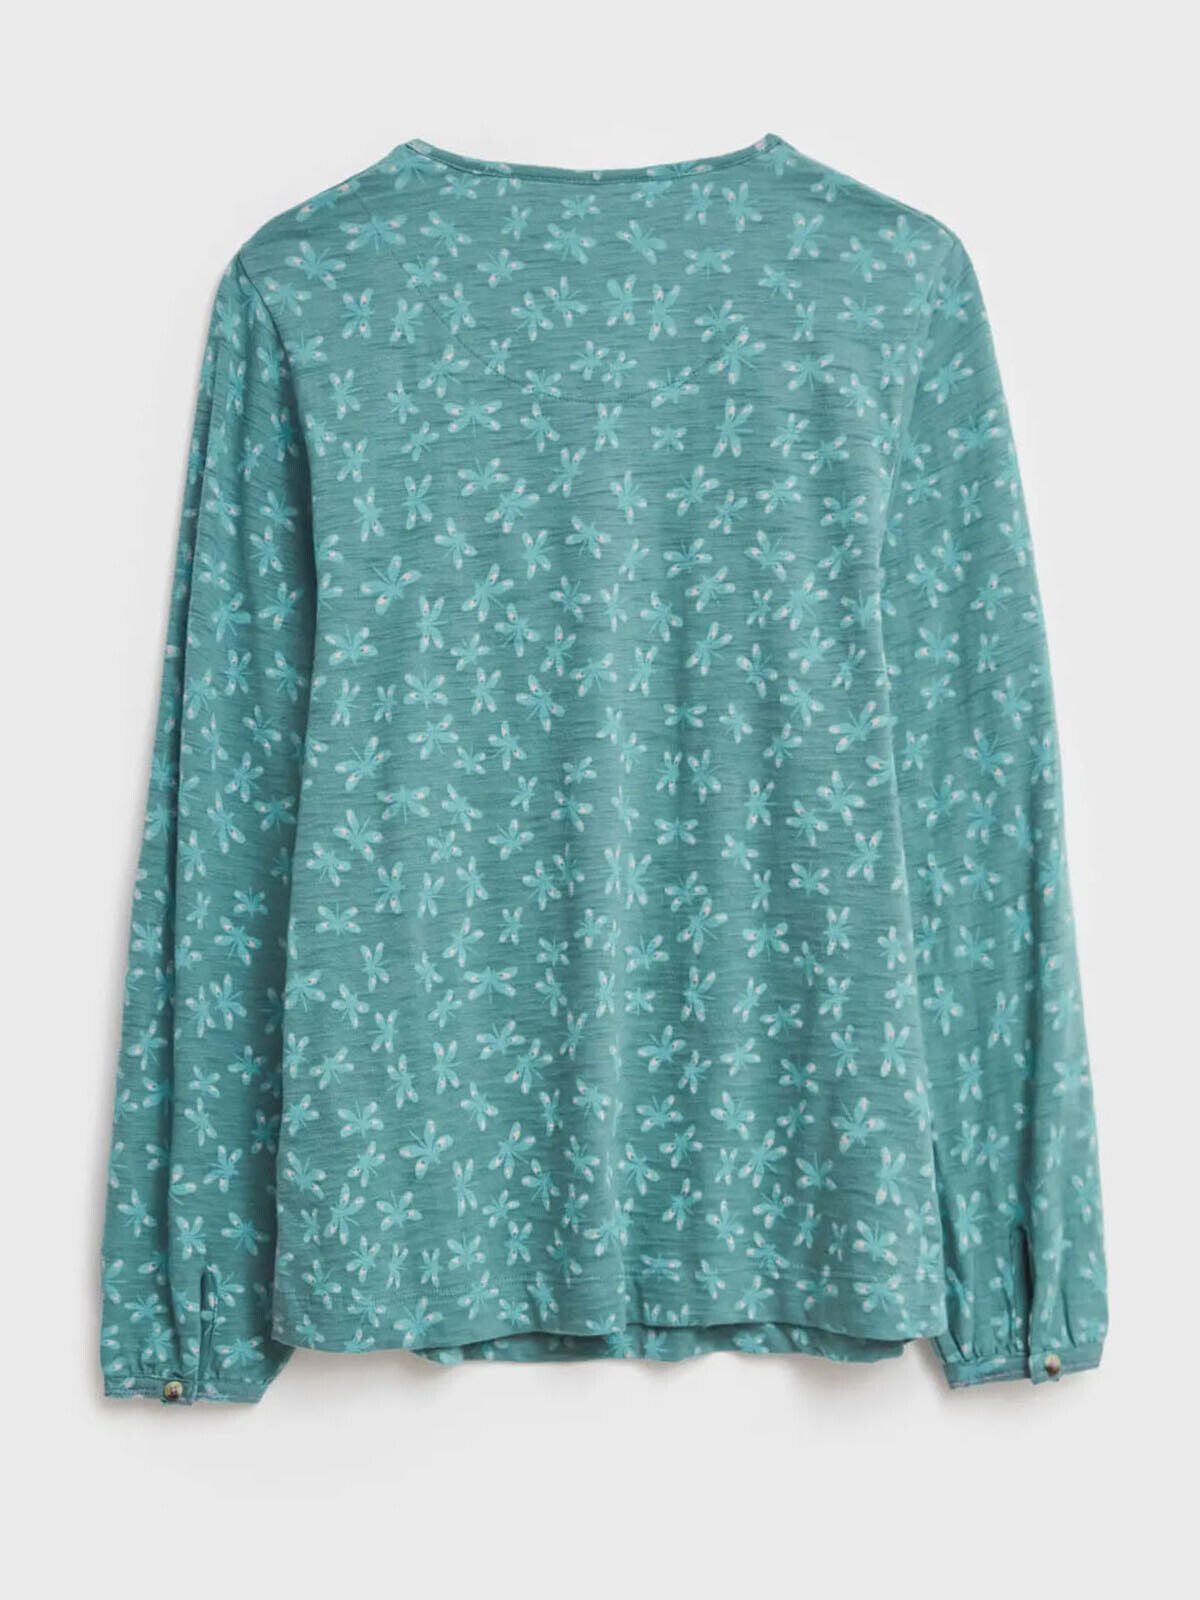 EX White Stuff Jersey Top Bea Teal Floral Sizes 10, 12, 16, 18, 20 RRP £39